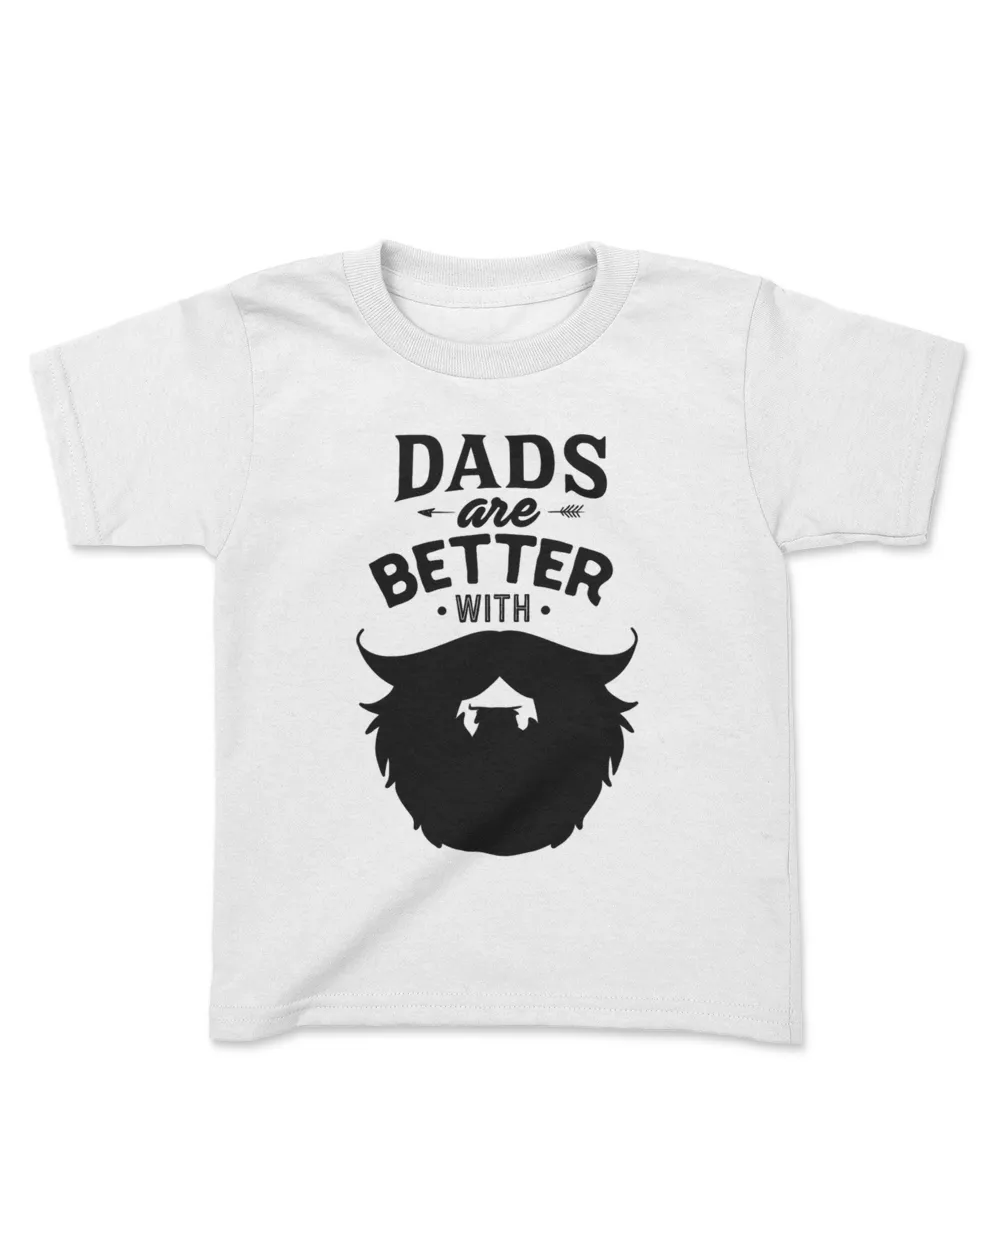 Dads are Better with Beards